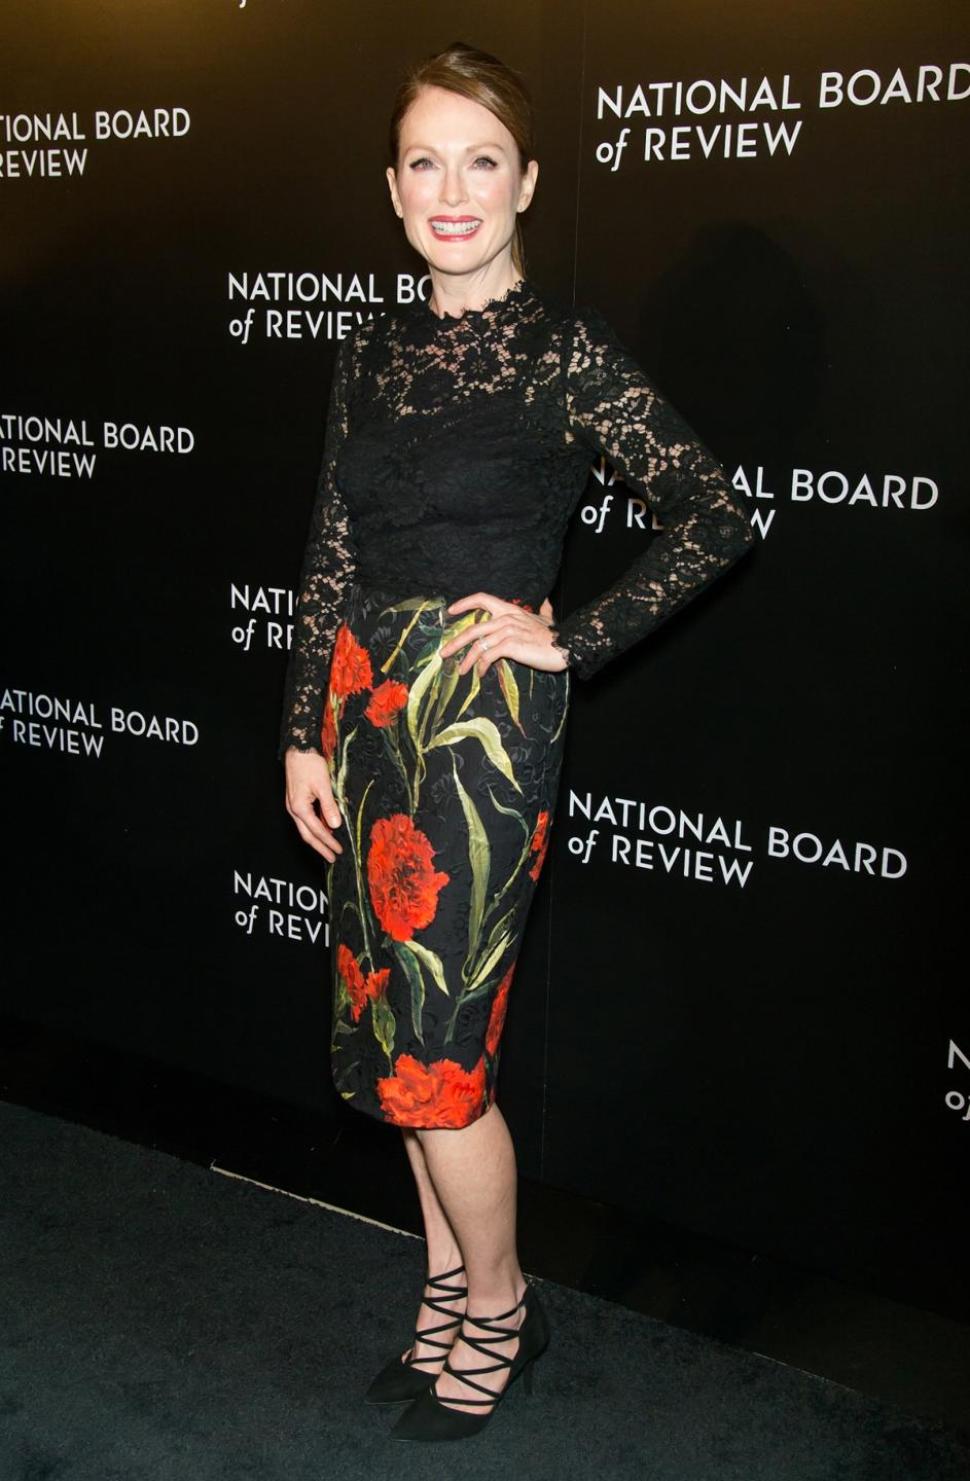 Julianne Moore adds glam at the National Board of Review gala in New York.